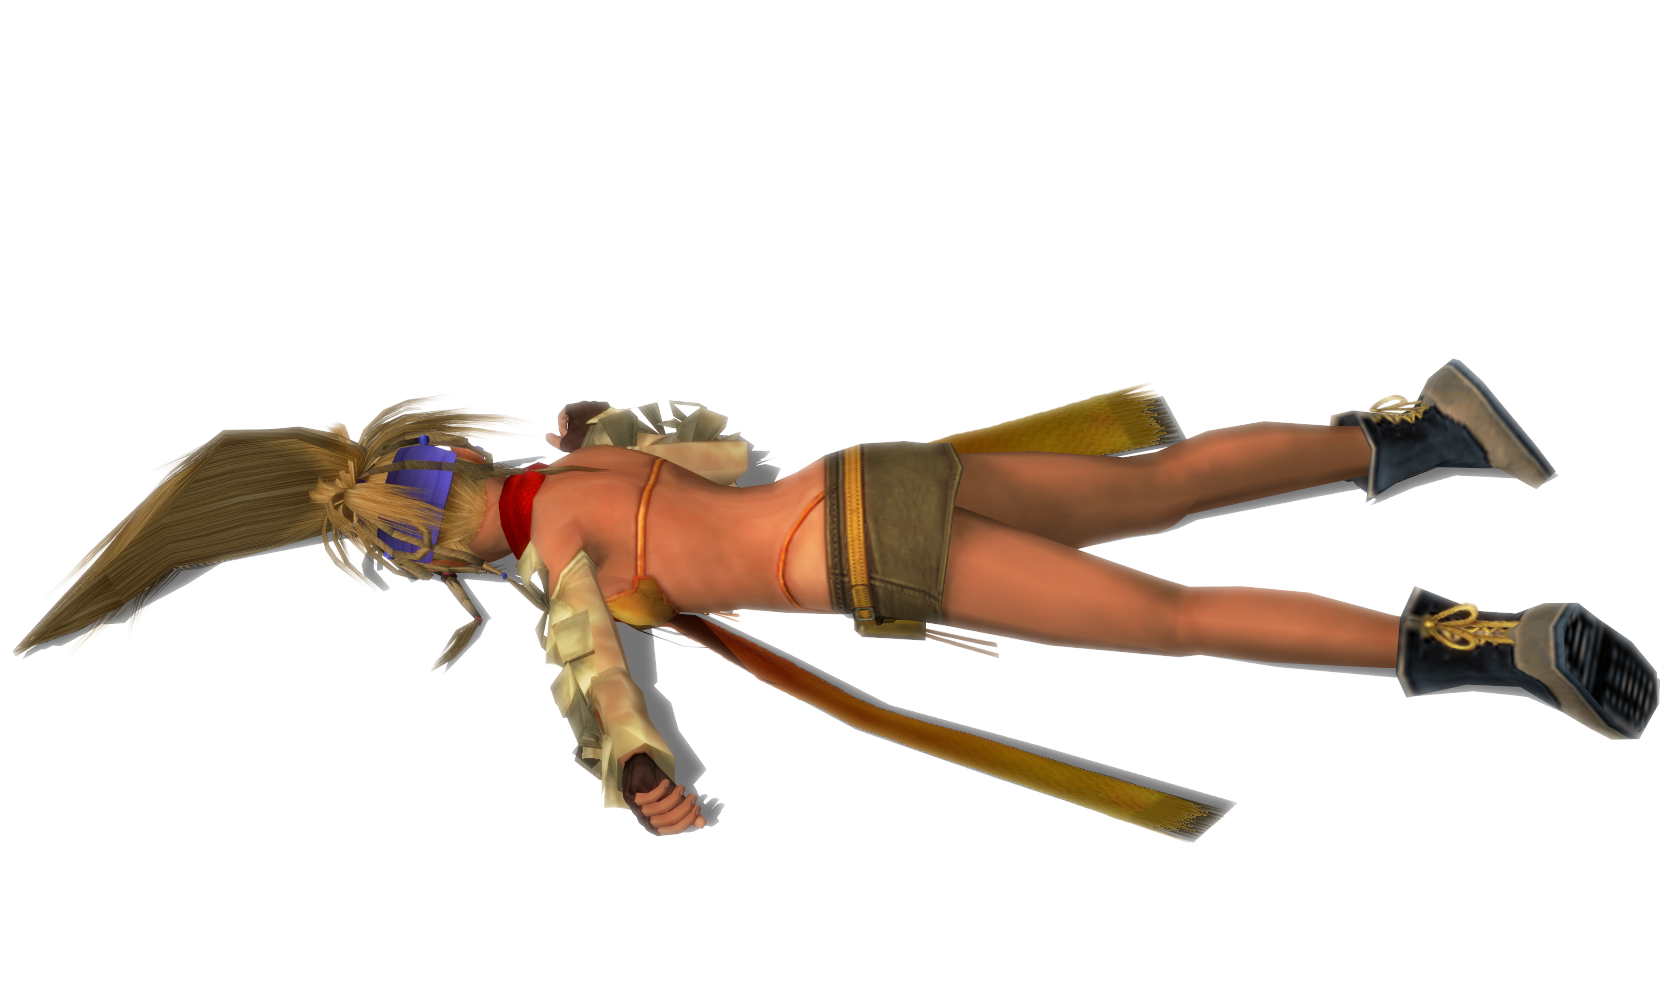 Rikku-Final-Fantasy-X-2 - undefined - Video Game Characters Get 'Real'  Makeovers